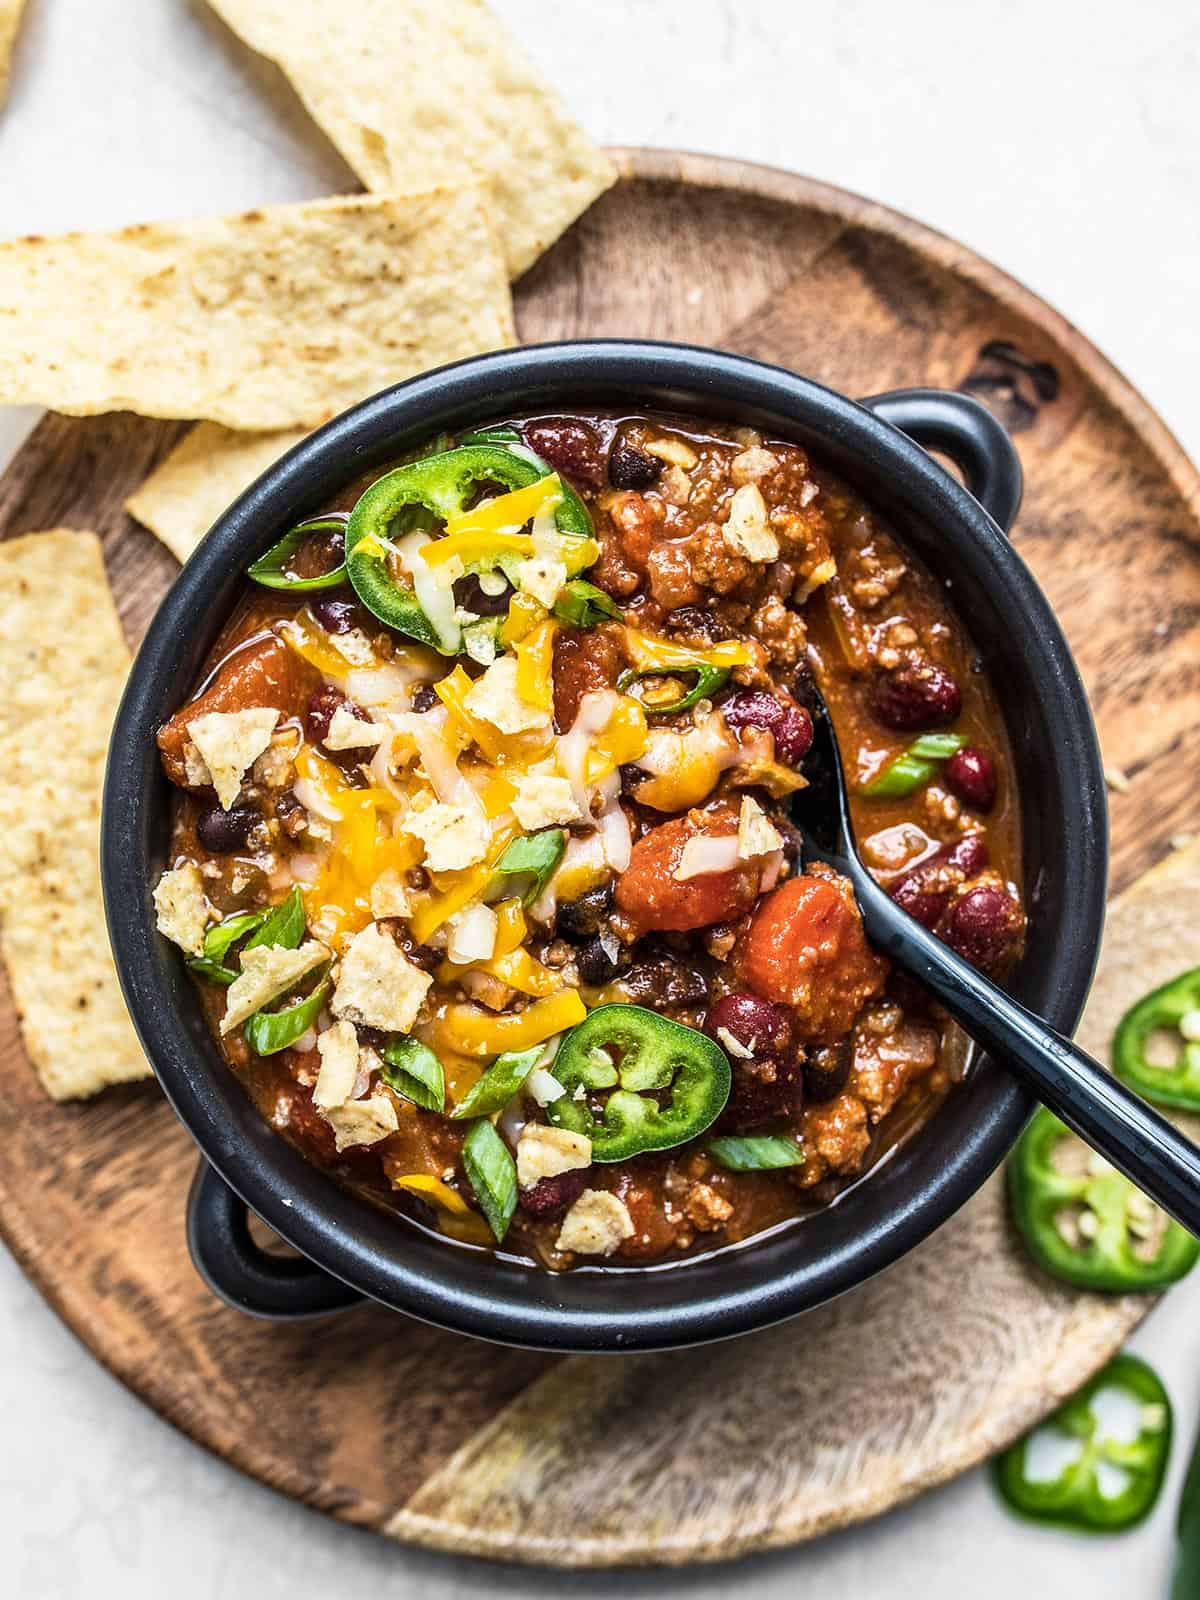 Overhead view of a bowl of beef chili with toppings and a spoon in the center.